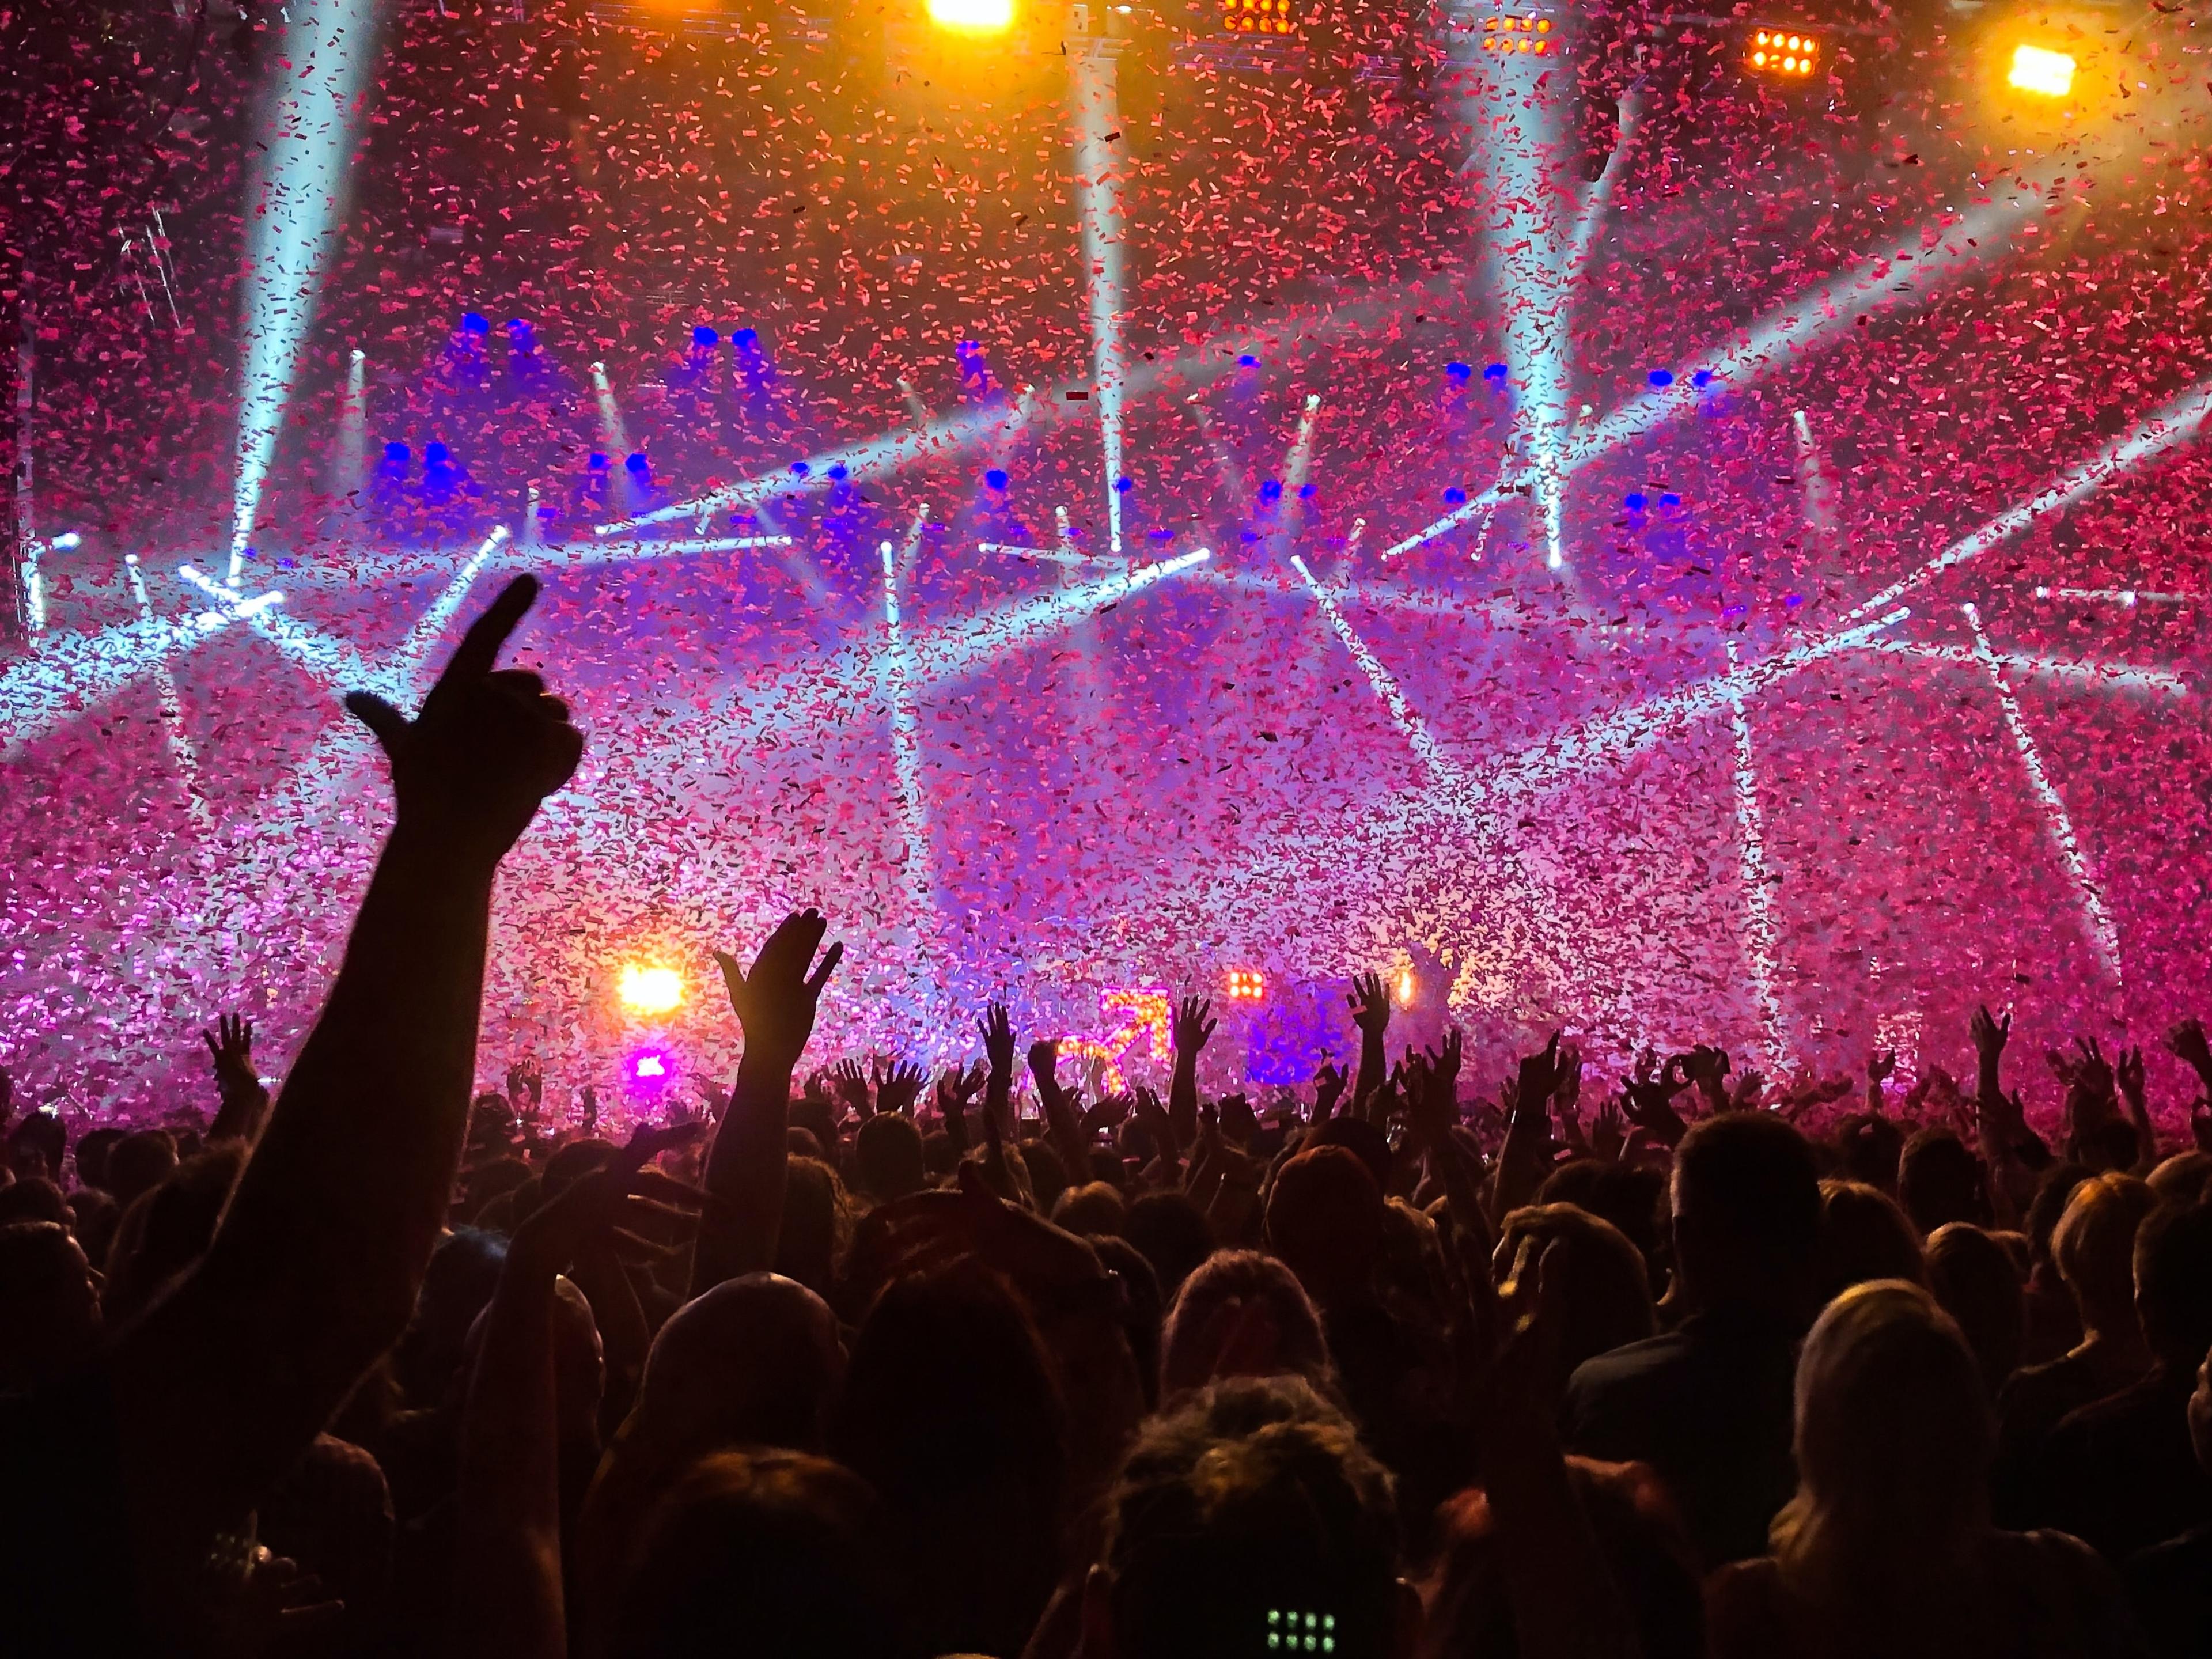 A picture showing a dancing crowd with a lot of confetti and laser effects.